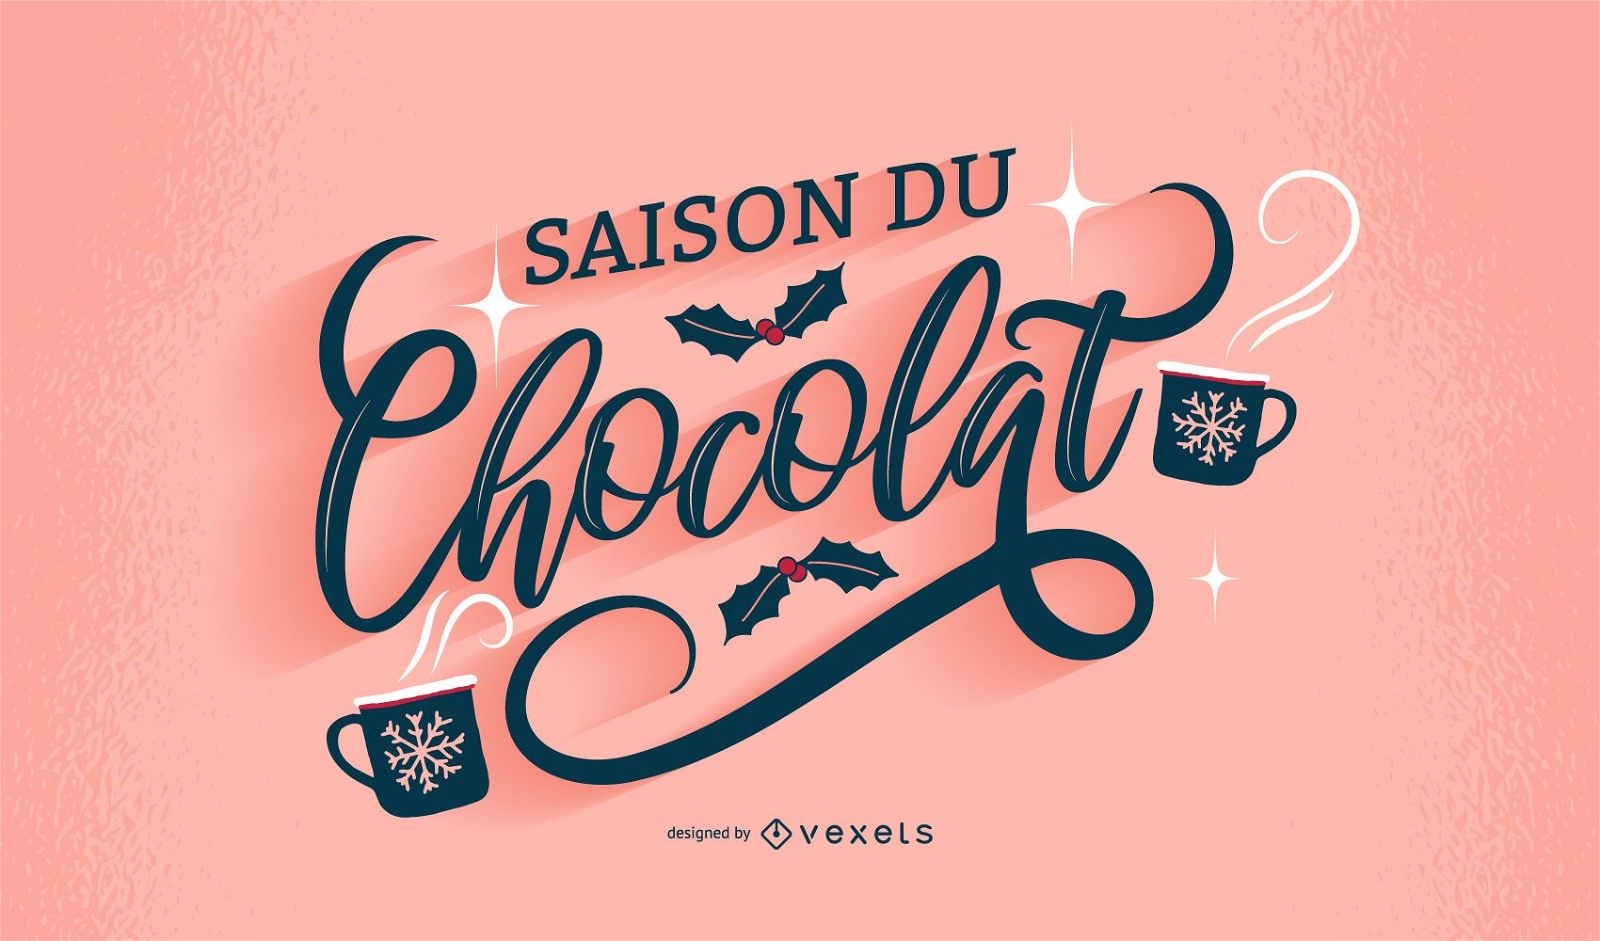 Chocolate Season French Lettering Design